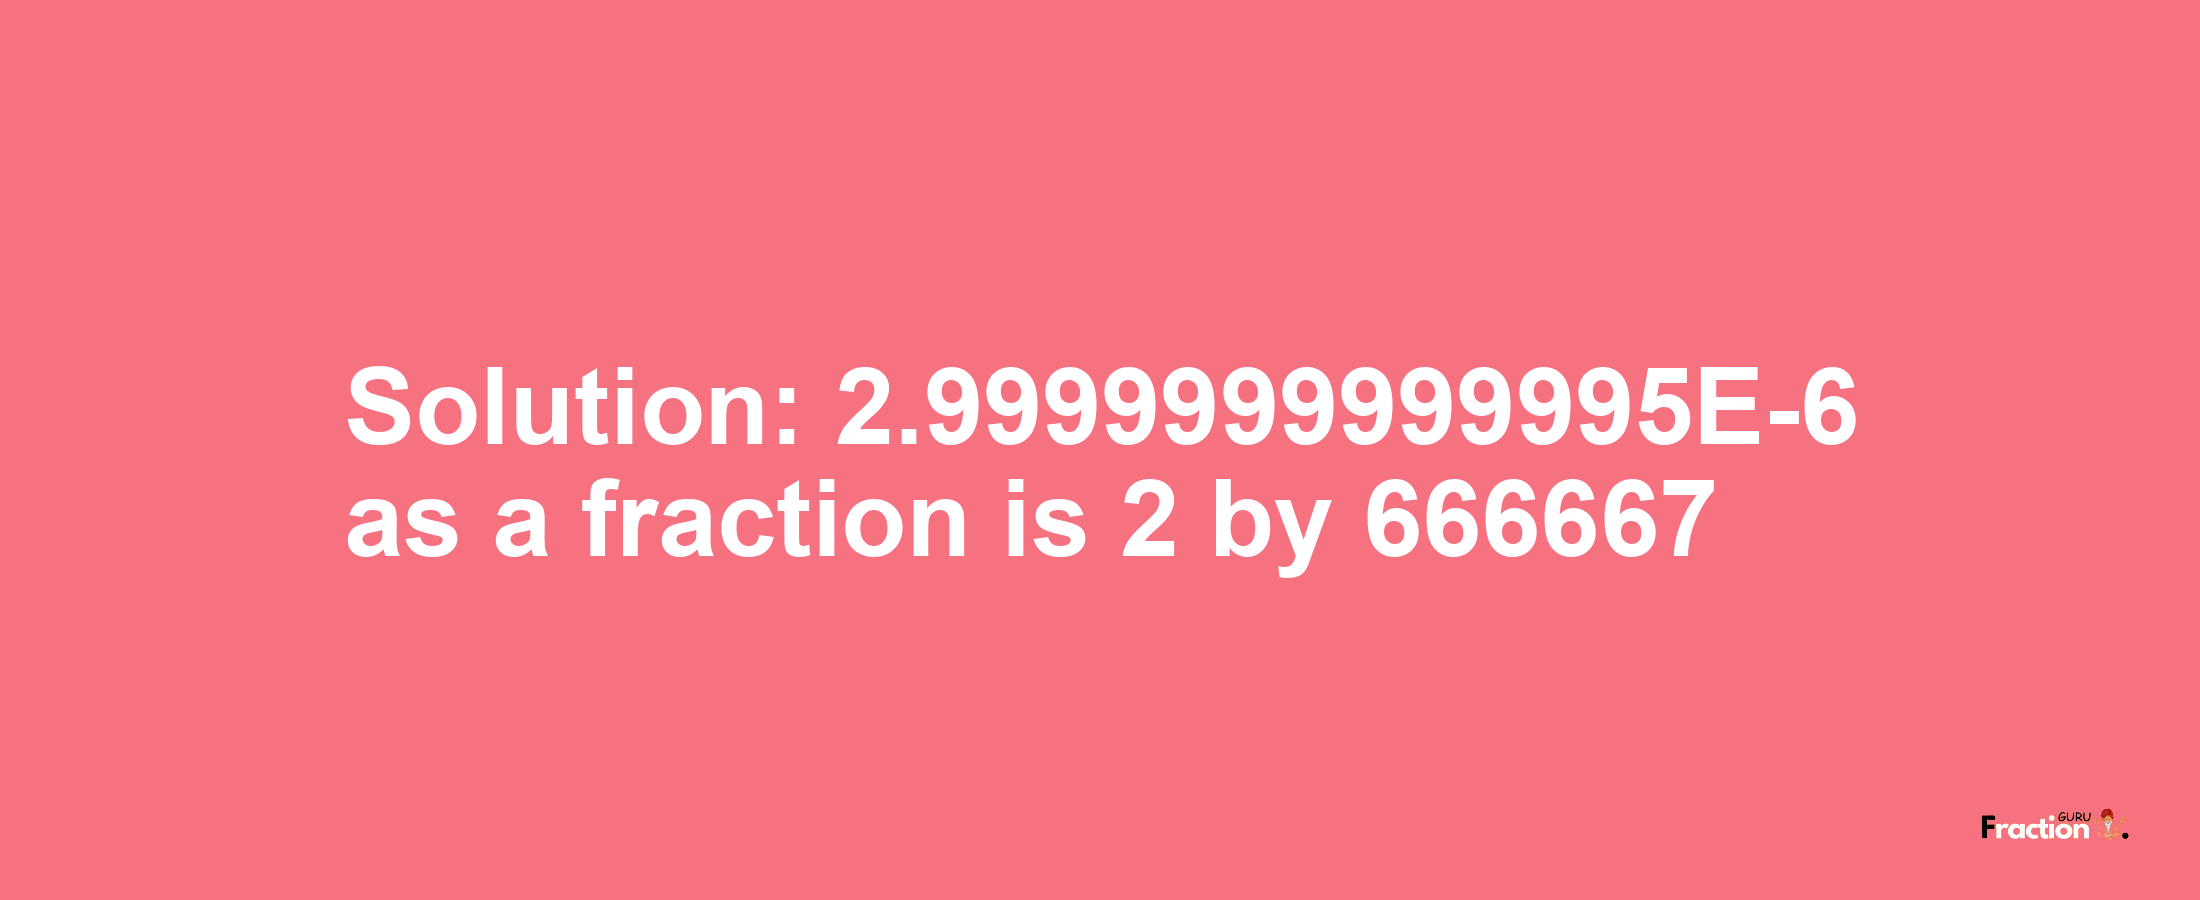 Solution:2.9999999999995E-6 as a fraction is 2/666667